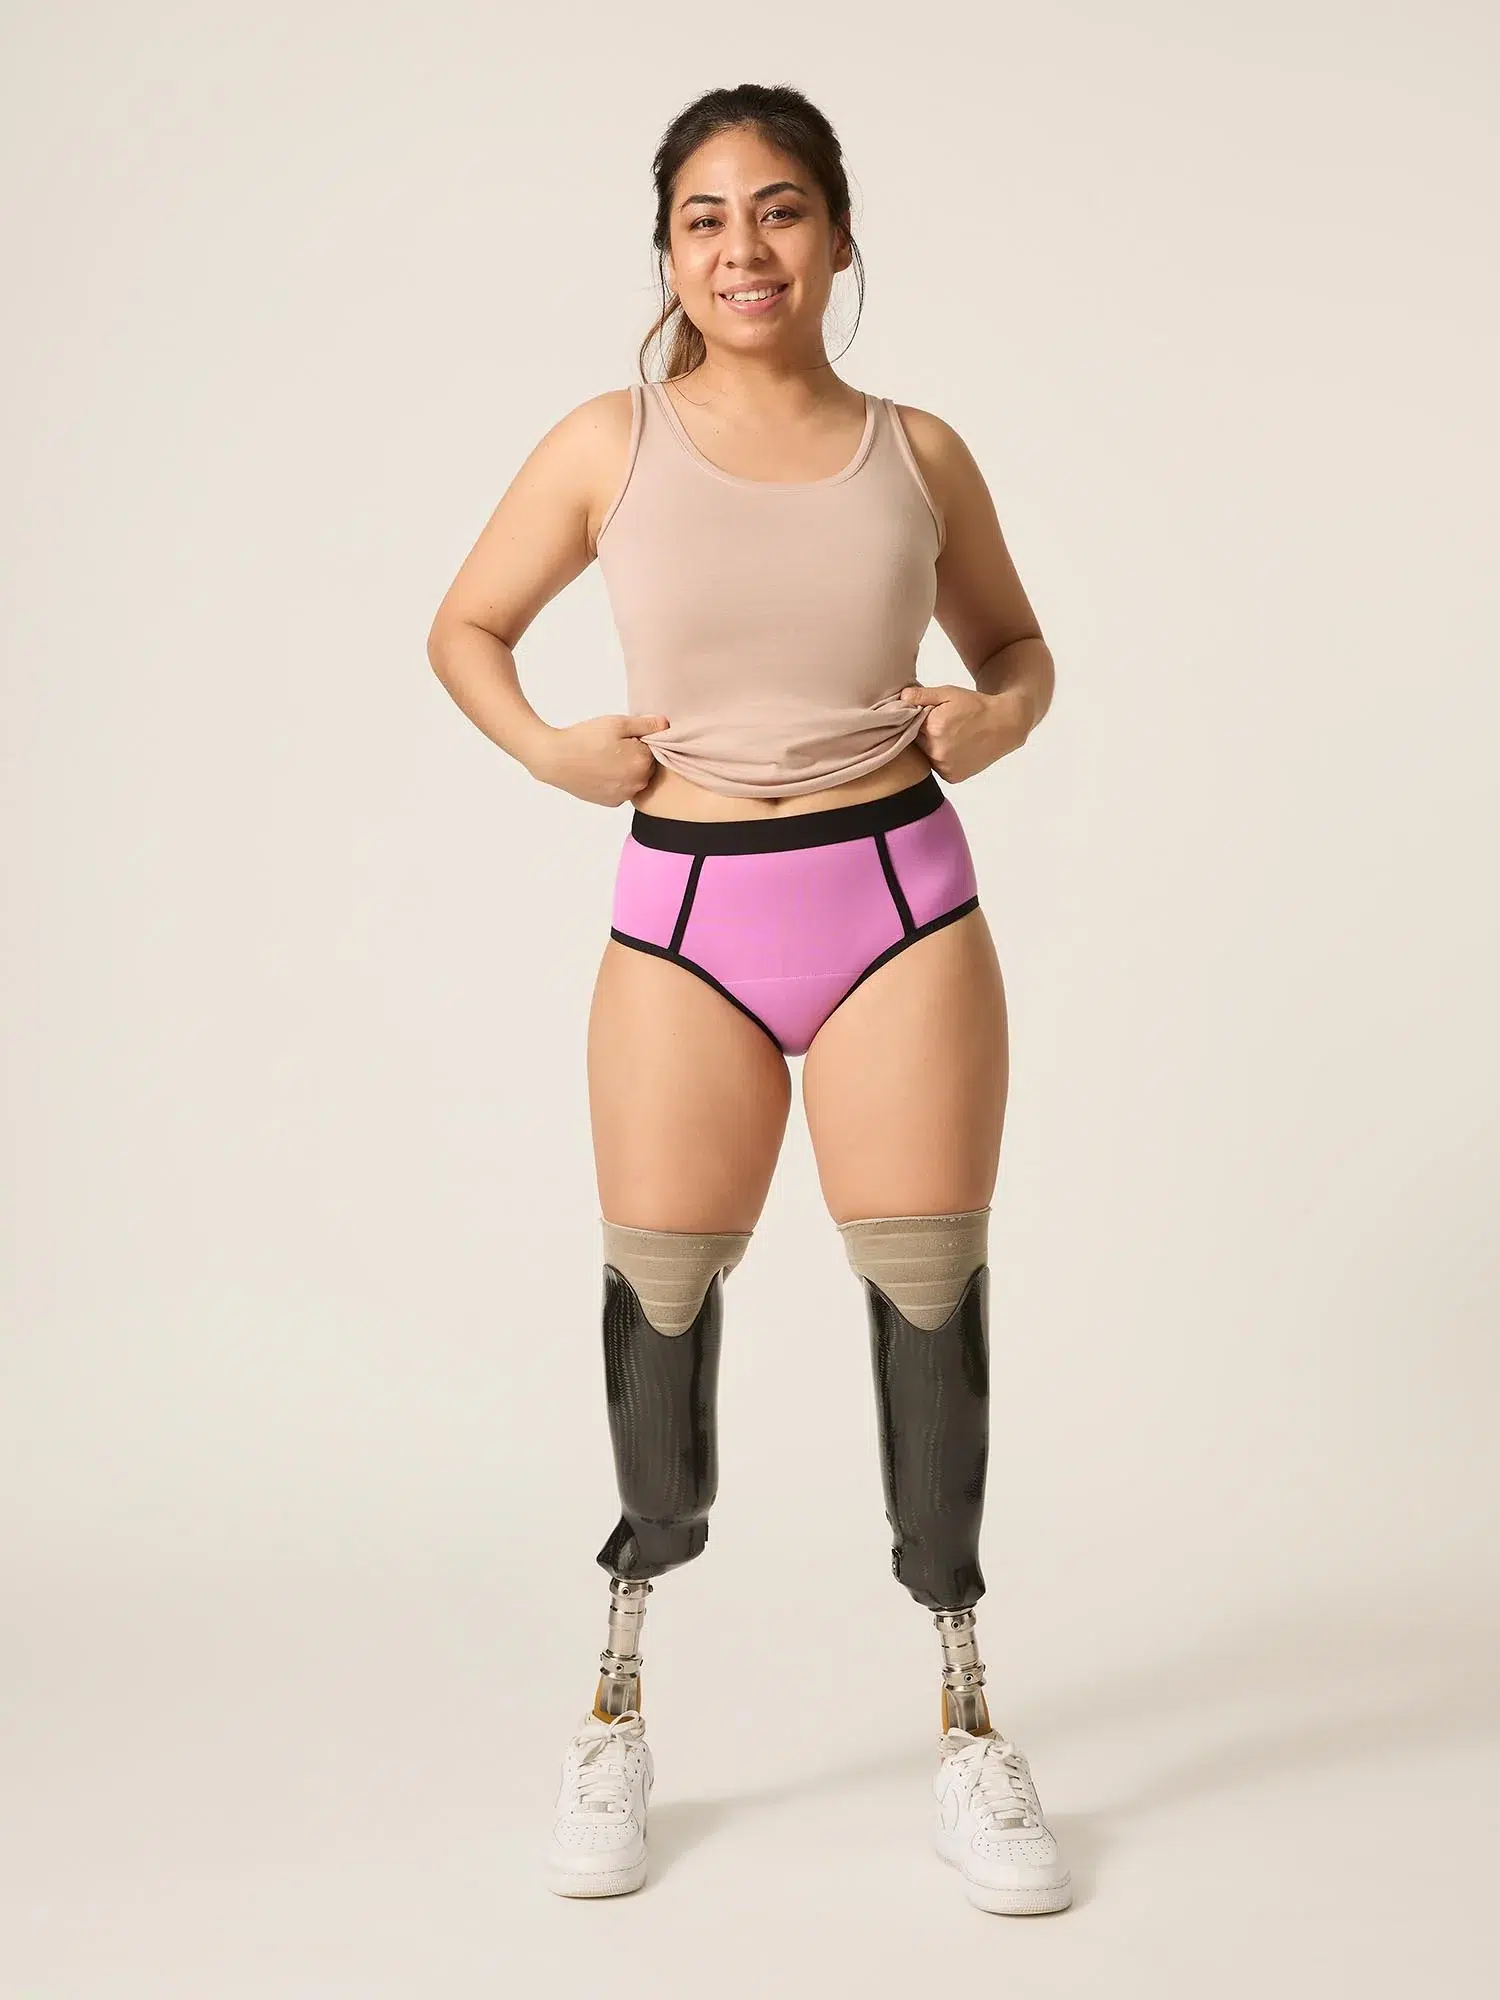 A woman with prosthetic legs lifts her tank top to show off her ModiBodi period underwear. 